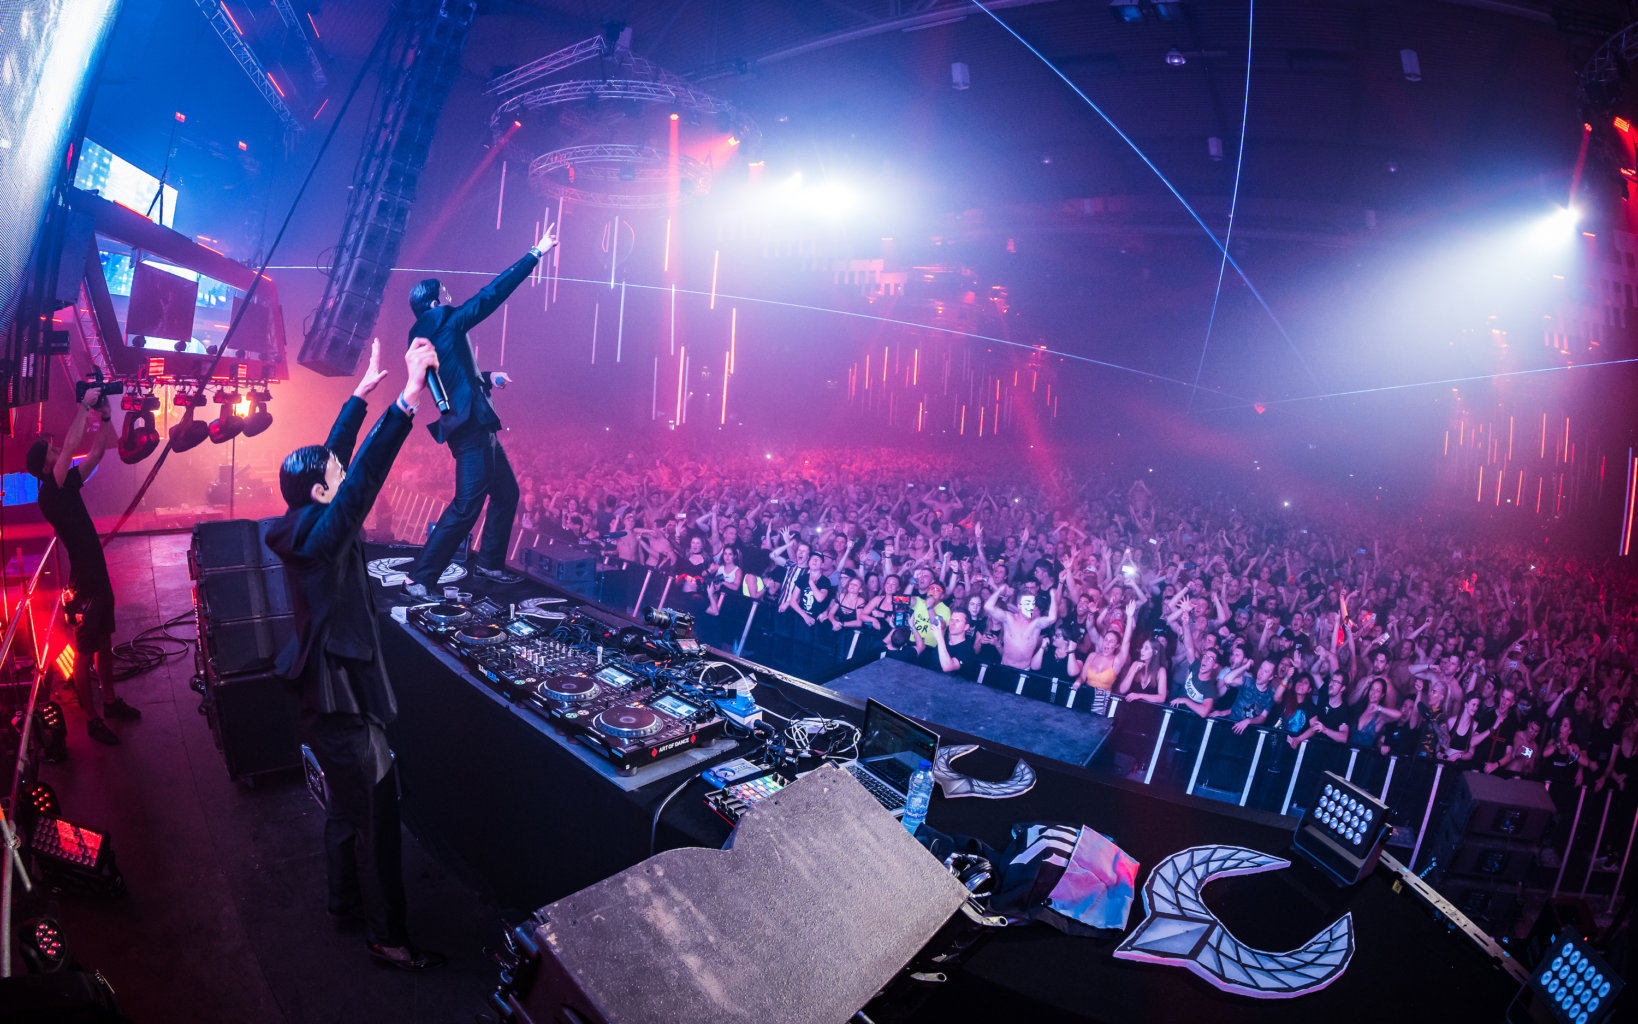 Watch how Gunz For Hire took vengeance at Supremacy 2019 with the liveset